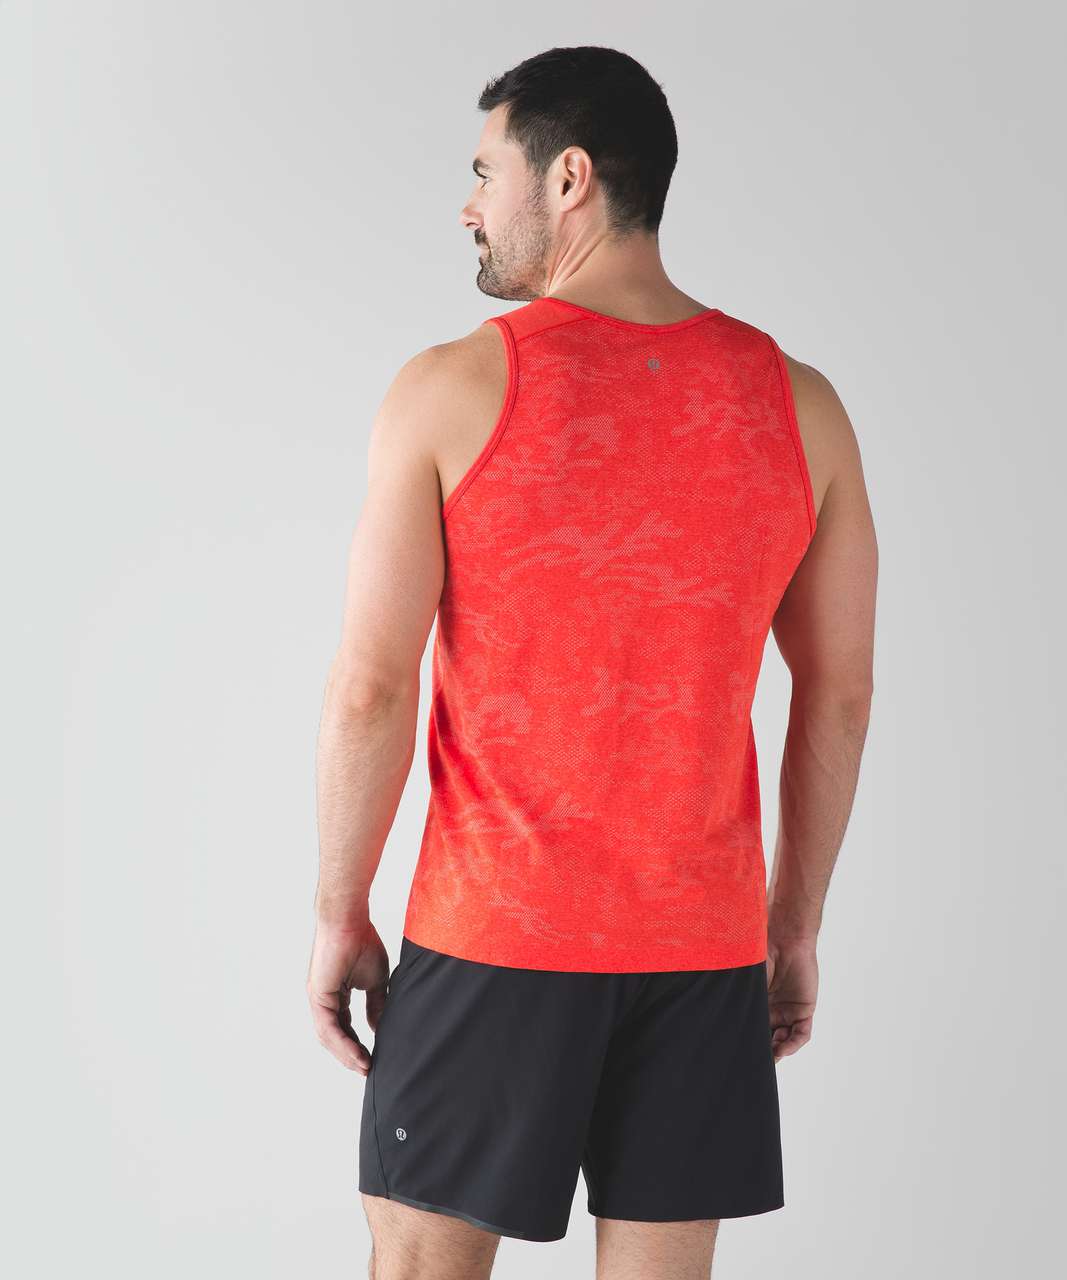 Lululemon Metal Vent Tech Tank - Prince Red (First Release)